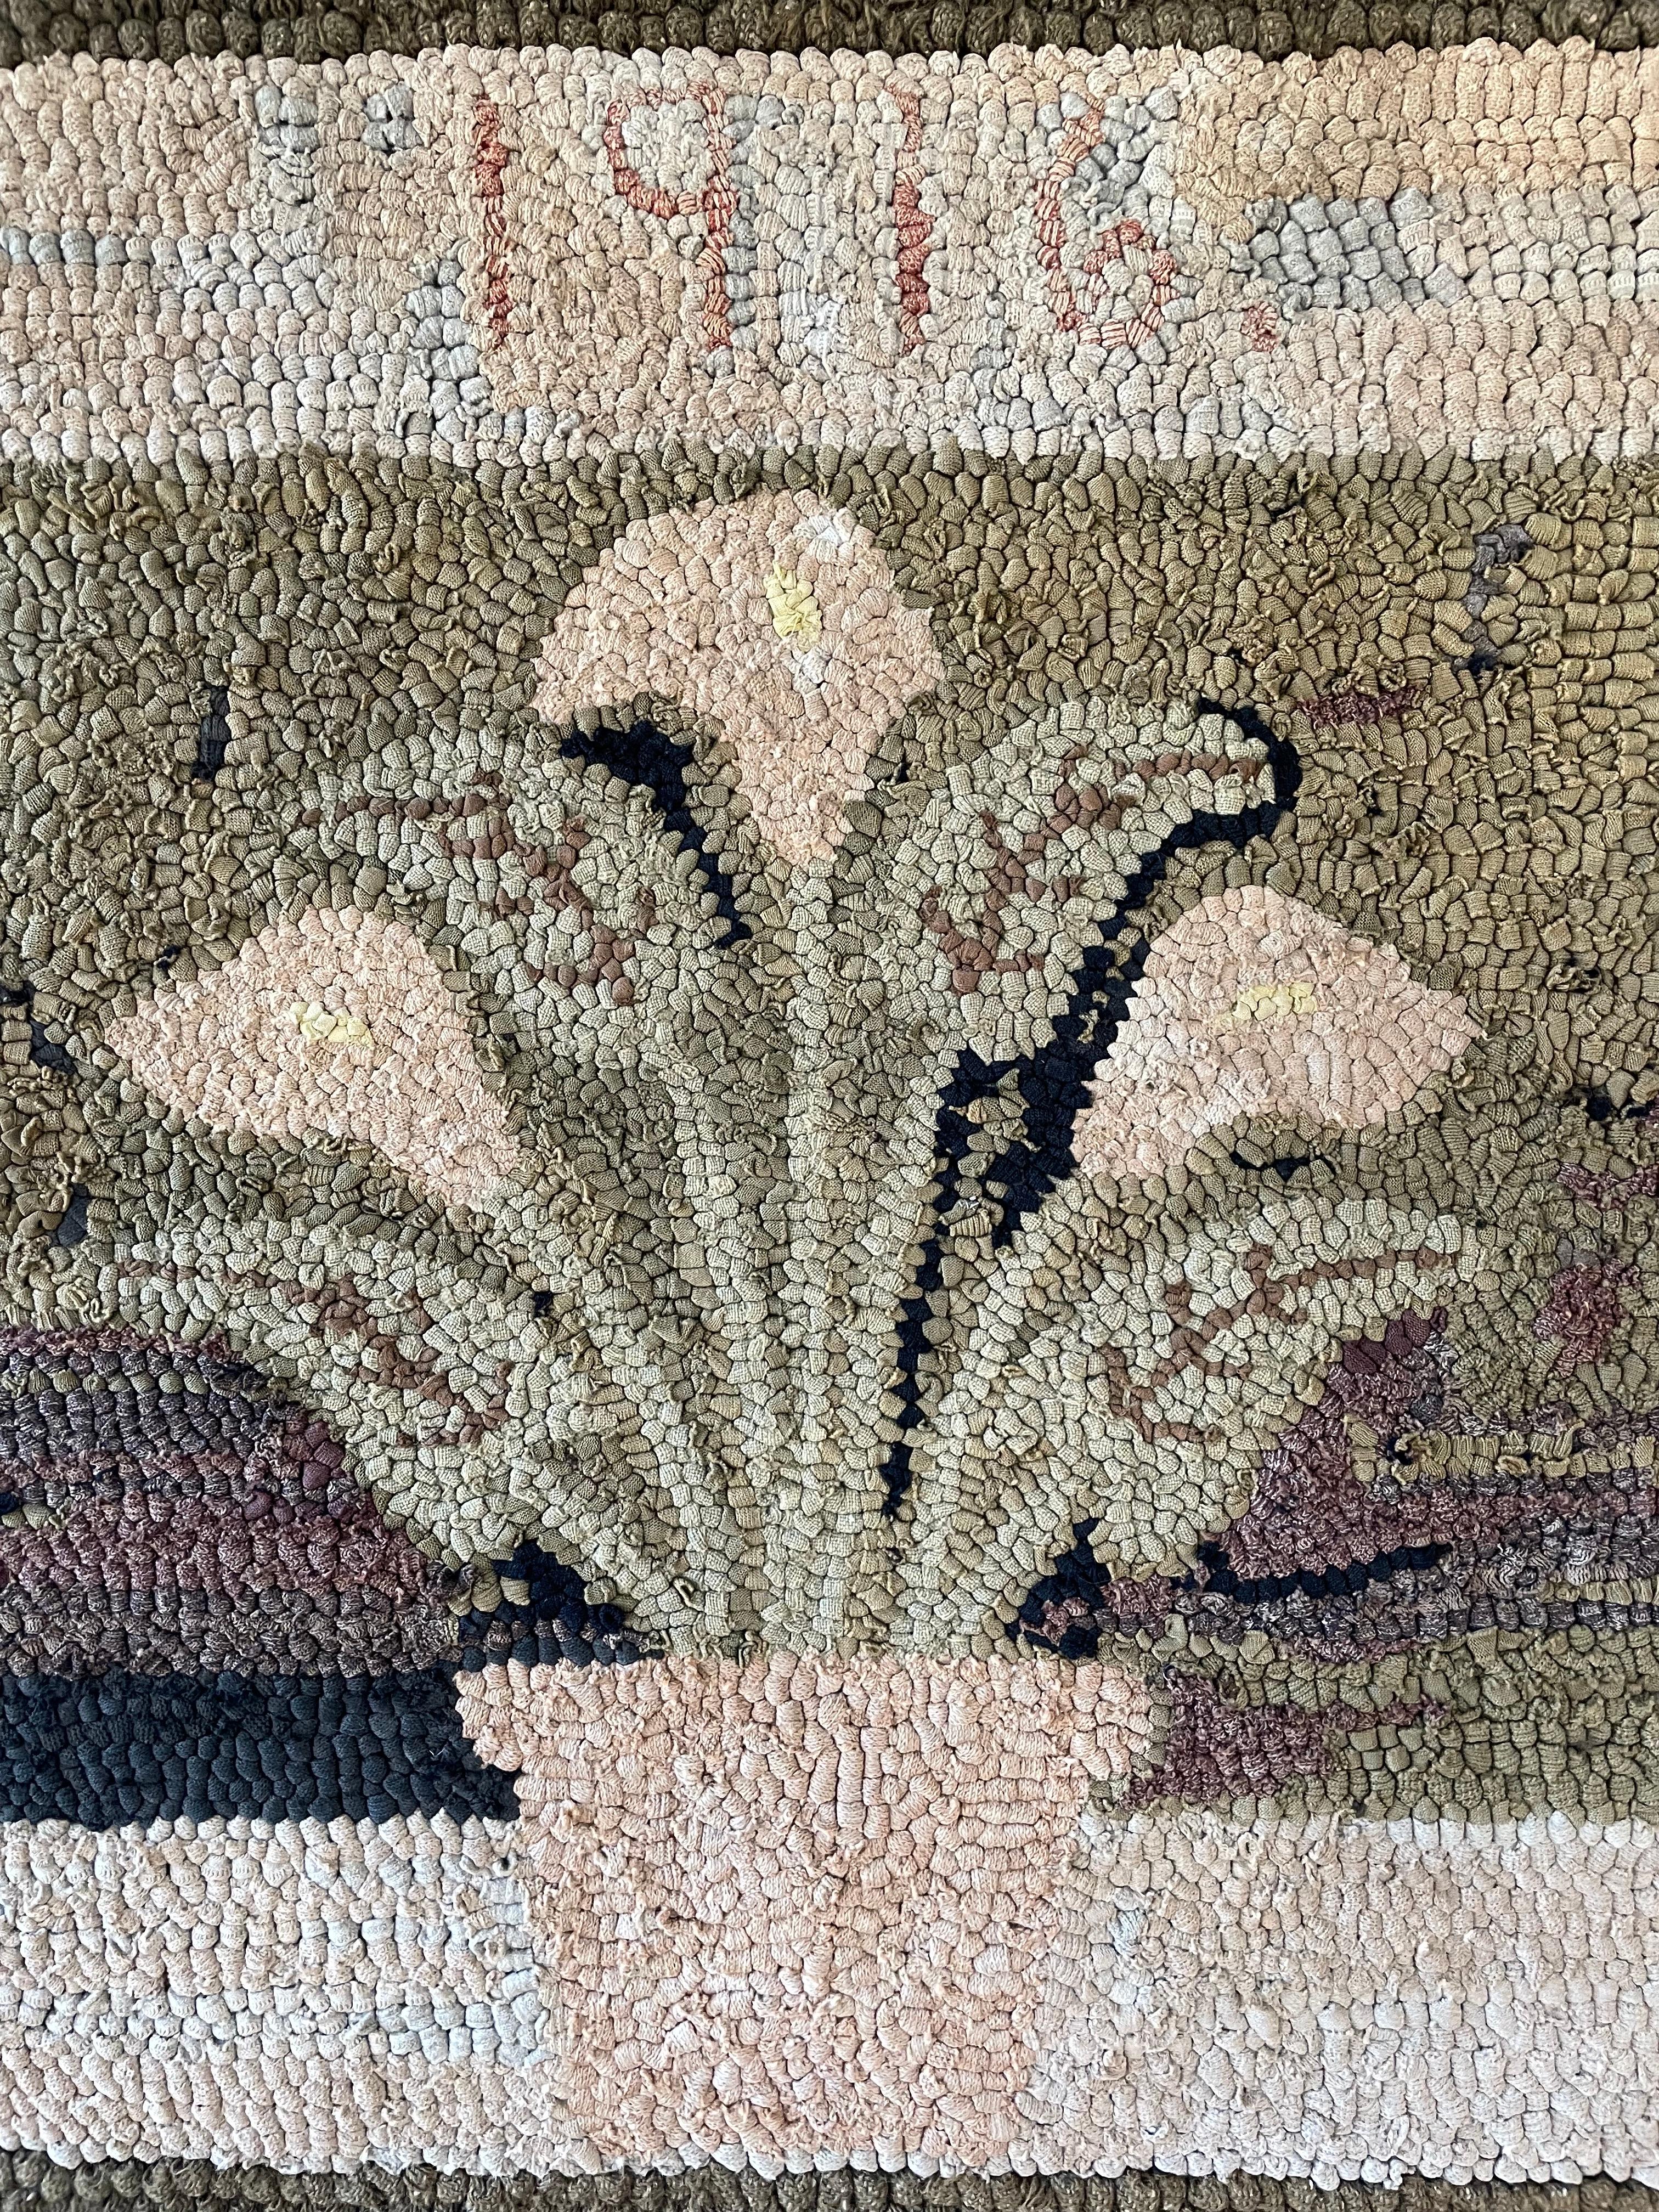 Early 20th Century Hooked Rug depicting potted peace lilies, with later mounting on canvas wrapped stretcher. Possibly Amish, dated 1916. With olive green, peach, and beige tones, some fading due to age.